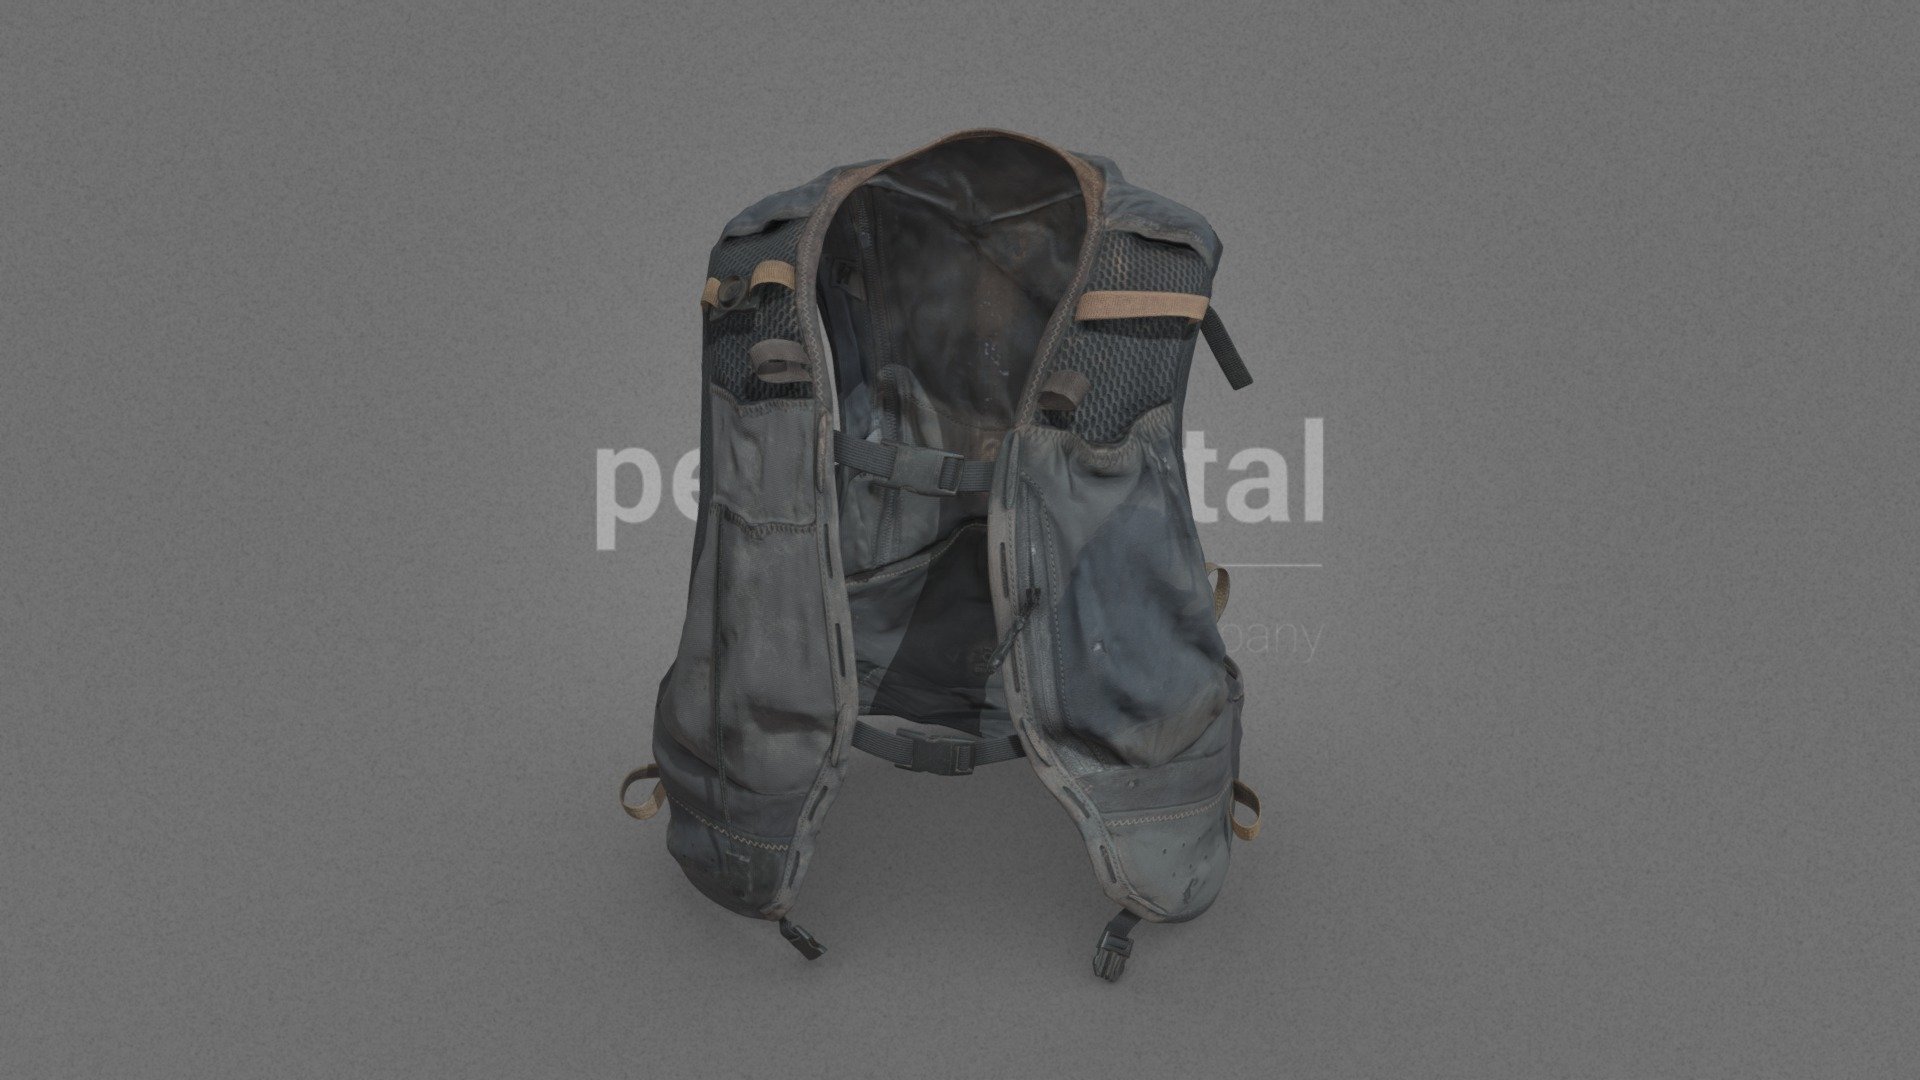 Our Wasteland Garments collection consists of several garments, which you can use in your audiovisual creations, extracted and modeled from our catalog of photogrammetry pieces.

They are optimized for use in 3D scenes of high polygonalization and optimized for rendering. We do not include characters, but they are positioned for you to include and adjust your own character. They have a model LOW (_LODRIG) inside the Blender file (included in the AdditionalFiles), which you can use for vertex weighting or cloth simulation and thus, make the transfer of vertices or property masks from the LOW to the HIGH** model.

We have included the texture maps in high resolution, as well as the Displacement maps, so you can make extreme point of view with your 3D cameras, as well as the Blender file so you can edit any aspect of the set.

Enjoy it.

Web: https://peris.digital/ - Wasteland Garments Series - Model 06 BackPack - 3D model by Peris Digital (@perisdigital) 3d model